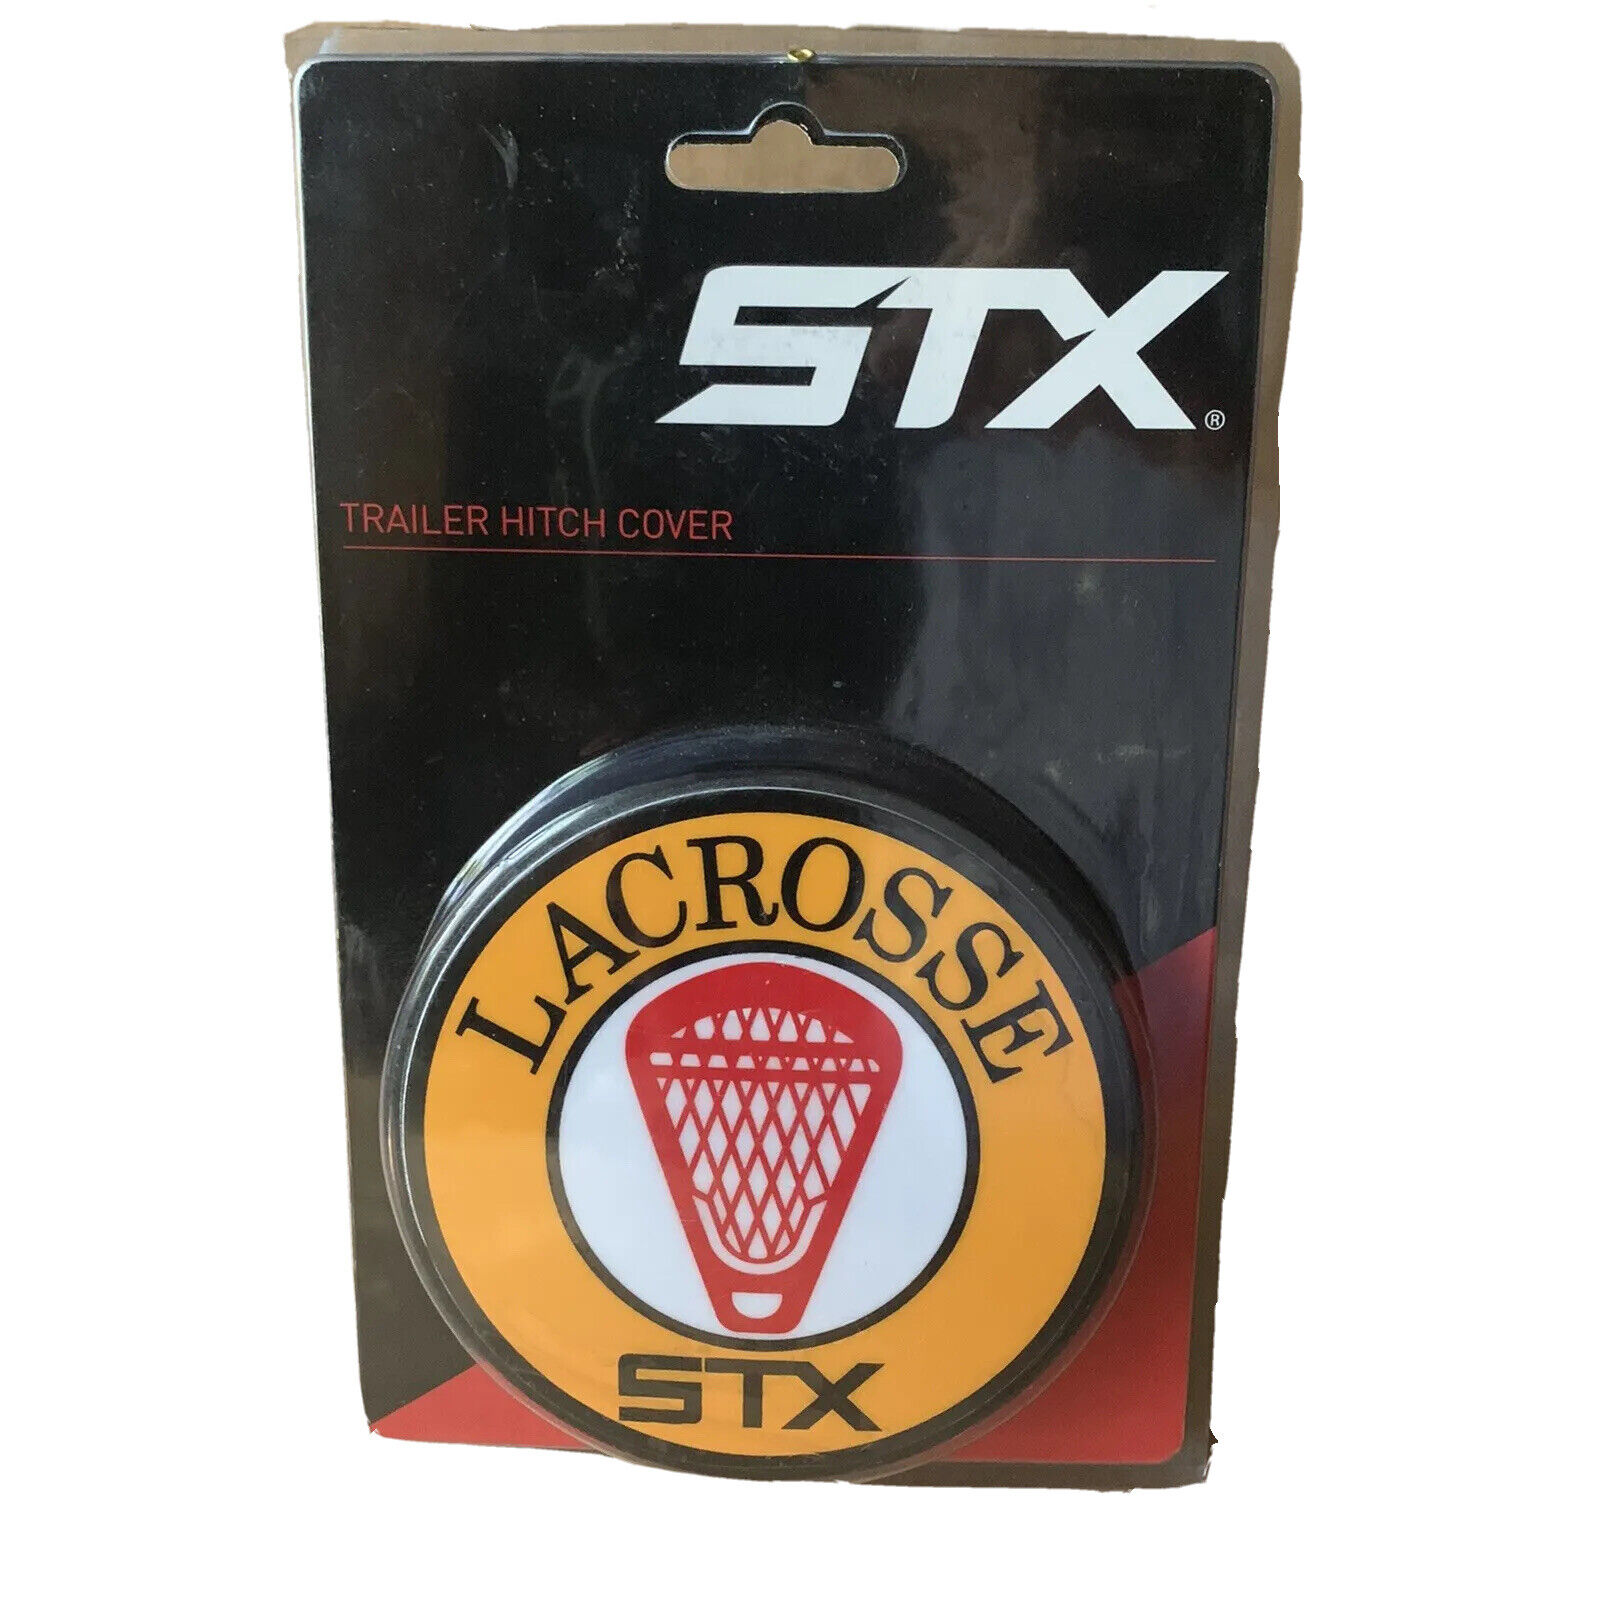 STX LACROSSE PLAYER SPORTING GOODS TRAILER HITCH PLUG COVER, NEW 